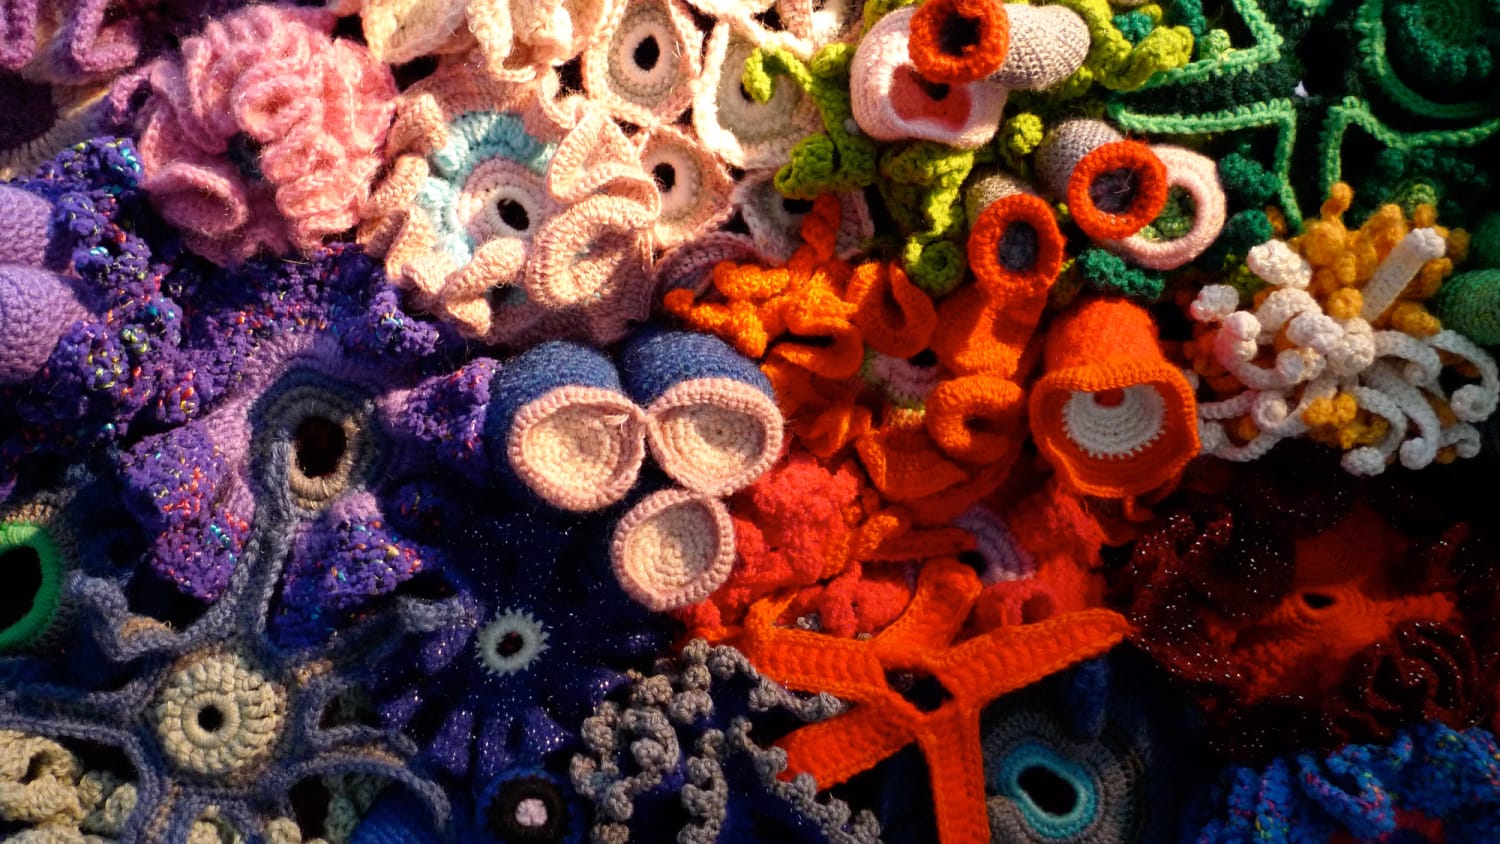 Gallery: What happens when you mix math, coral and crochet? It’s mind-blowing